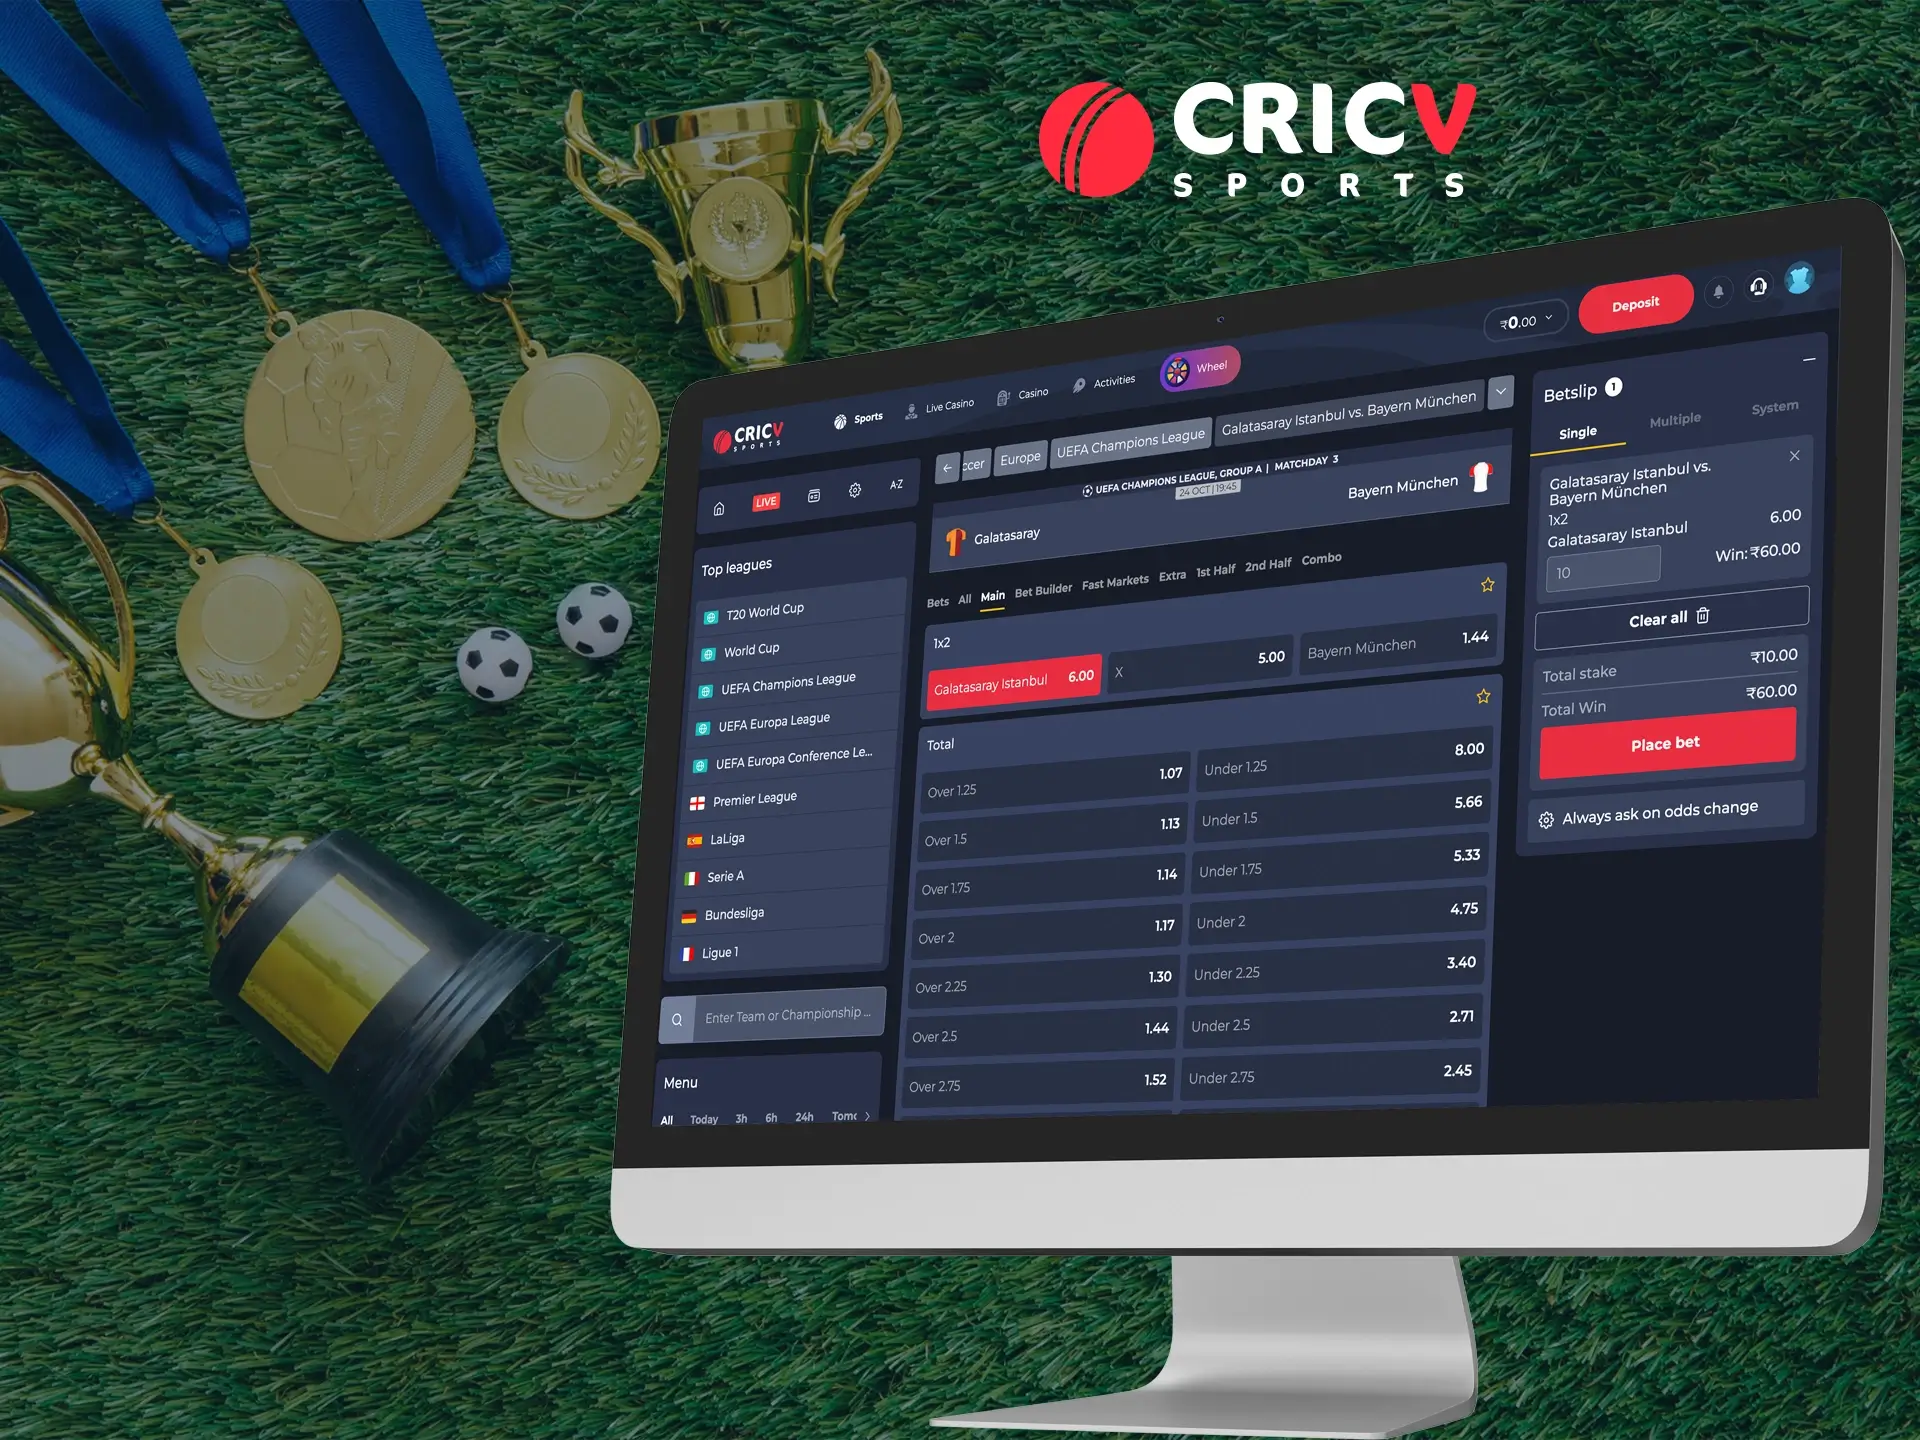 Sports and casinos are already waiting for your bets on Cricv.